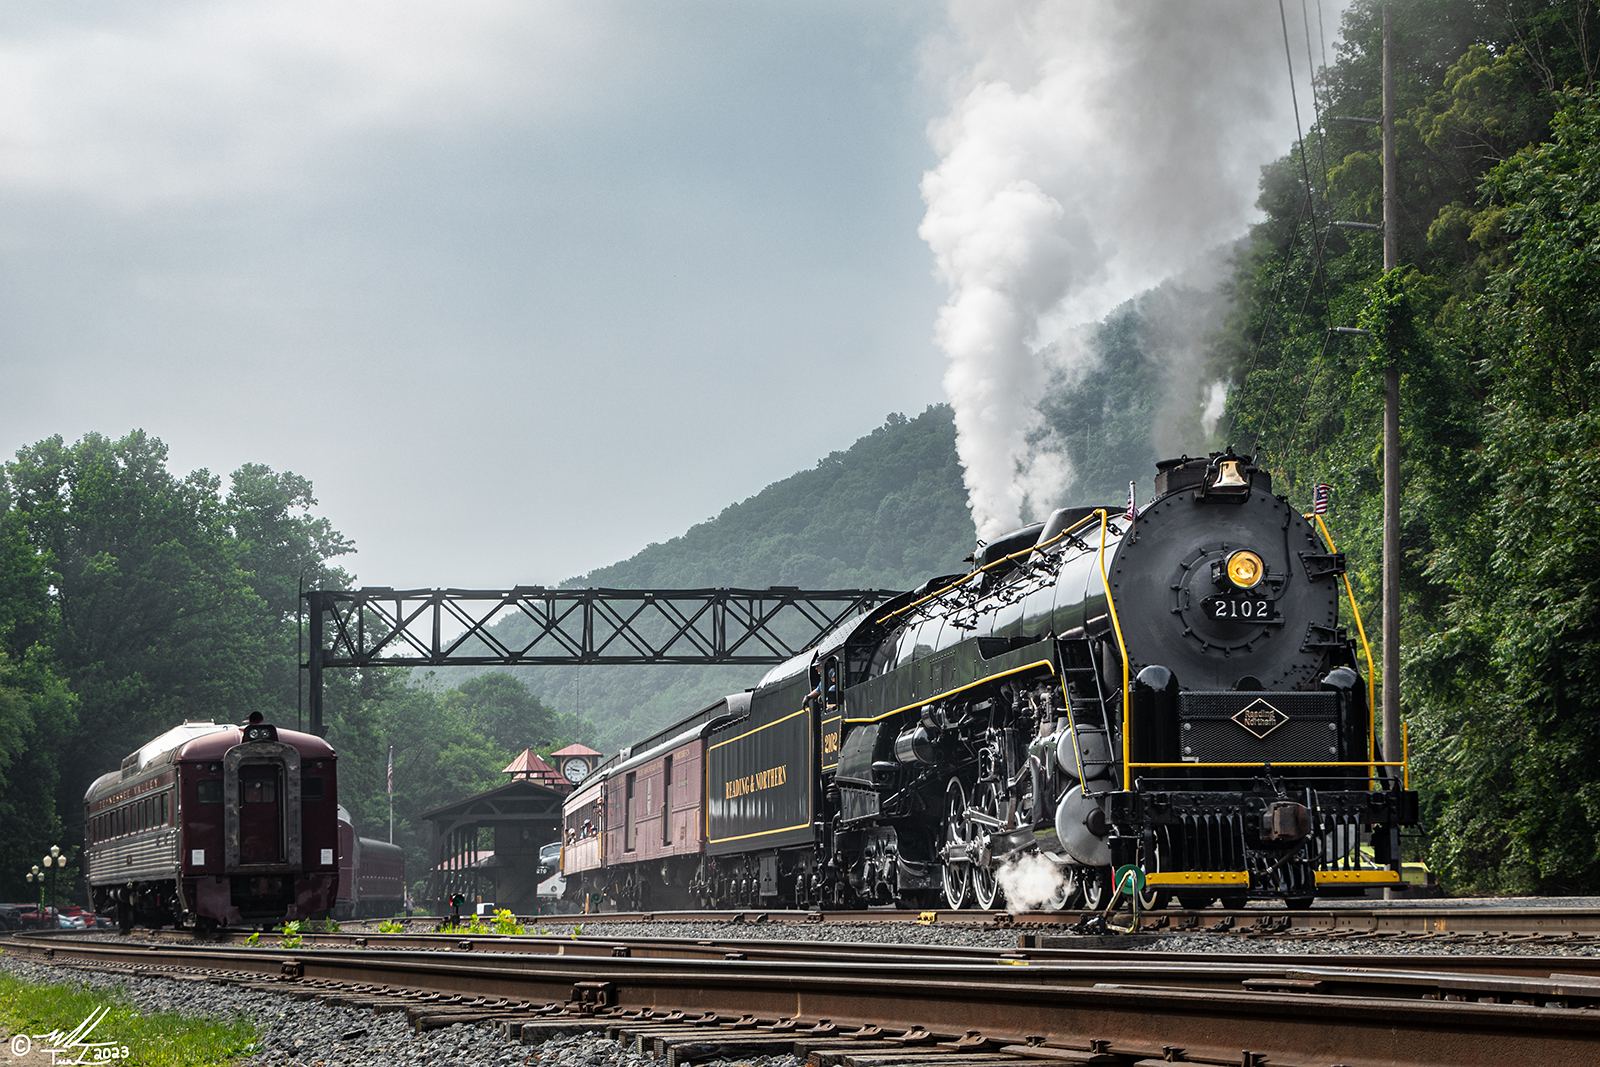 RDG 2102 is a class T-1 and  is pictured in Port Clinton, Pennsylvania, USA.  This was taken along the Port Clinton on the Reading Company. Photo Copyright: Mark Turkovich uploaded to Railroad Gallery on 07/01/2023. This photograph of RDG 2102 was taken on Saturday, July 01, 2023. All Rights Reserved. 